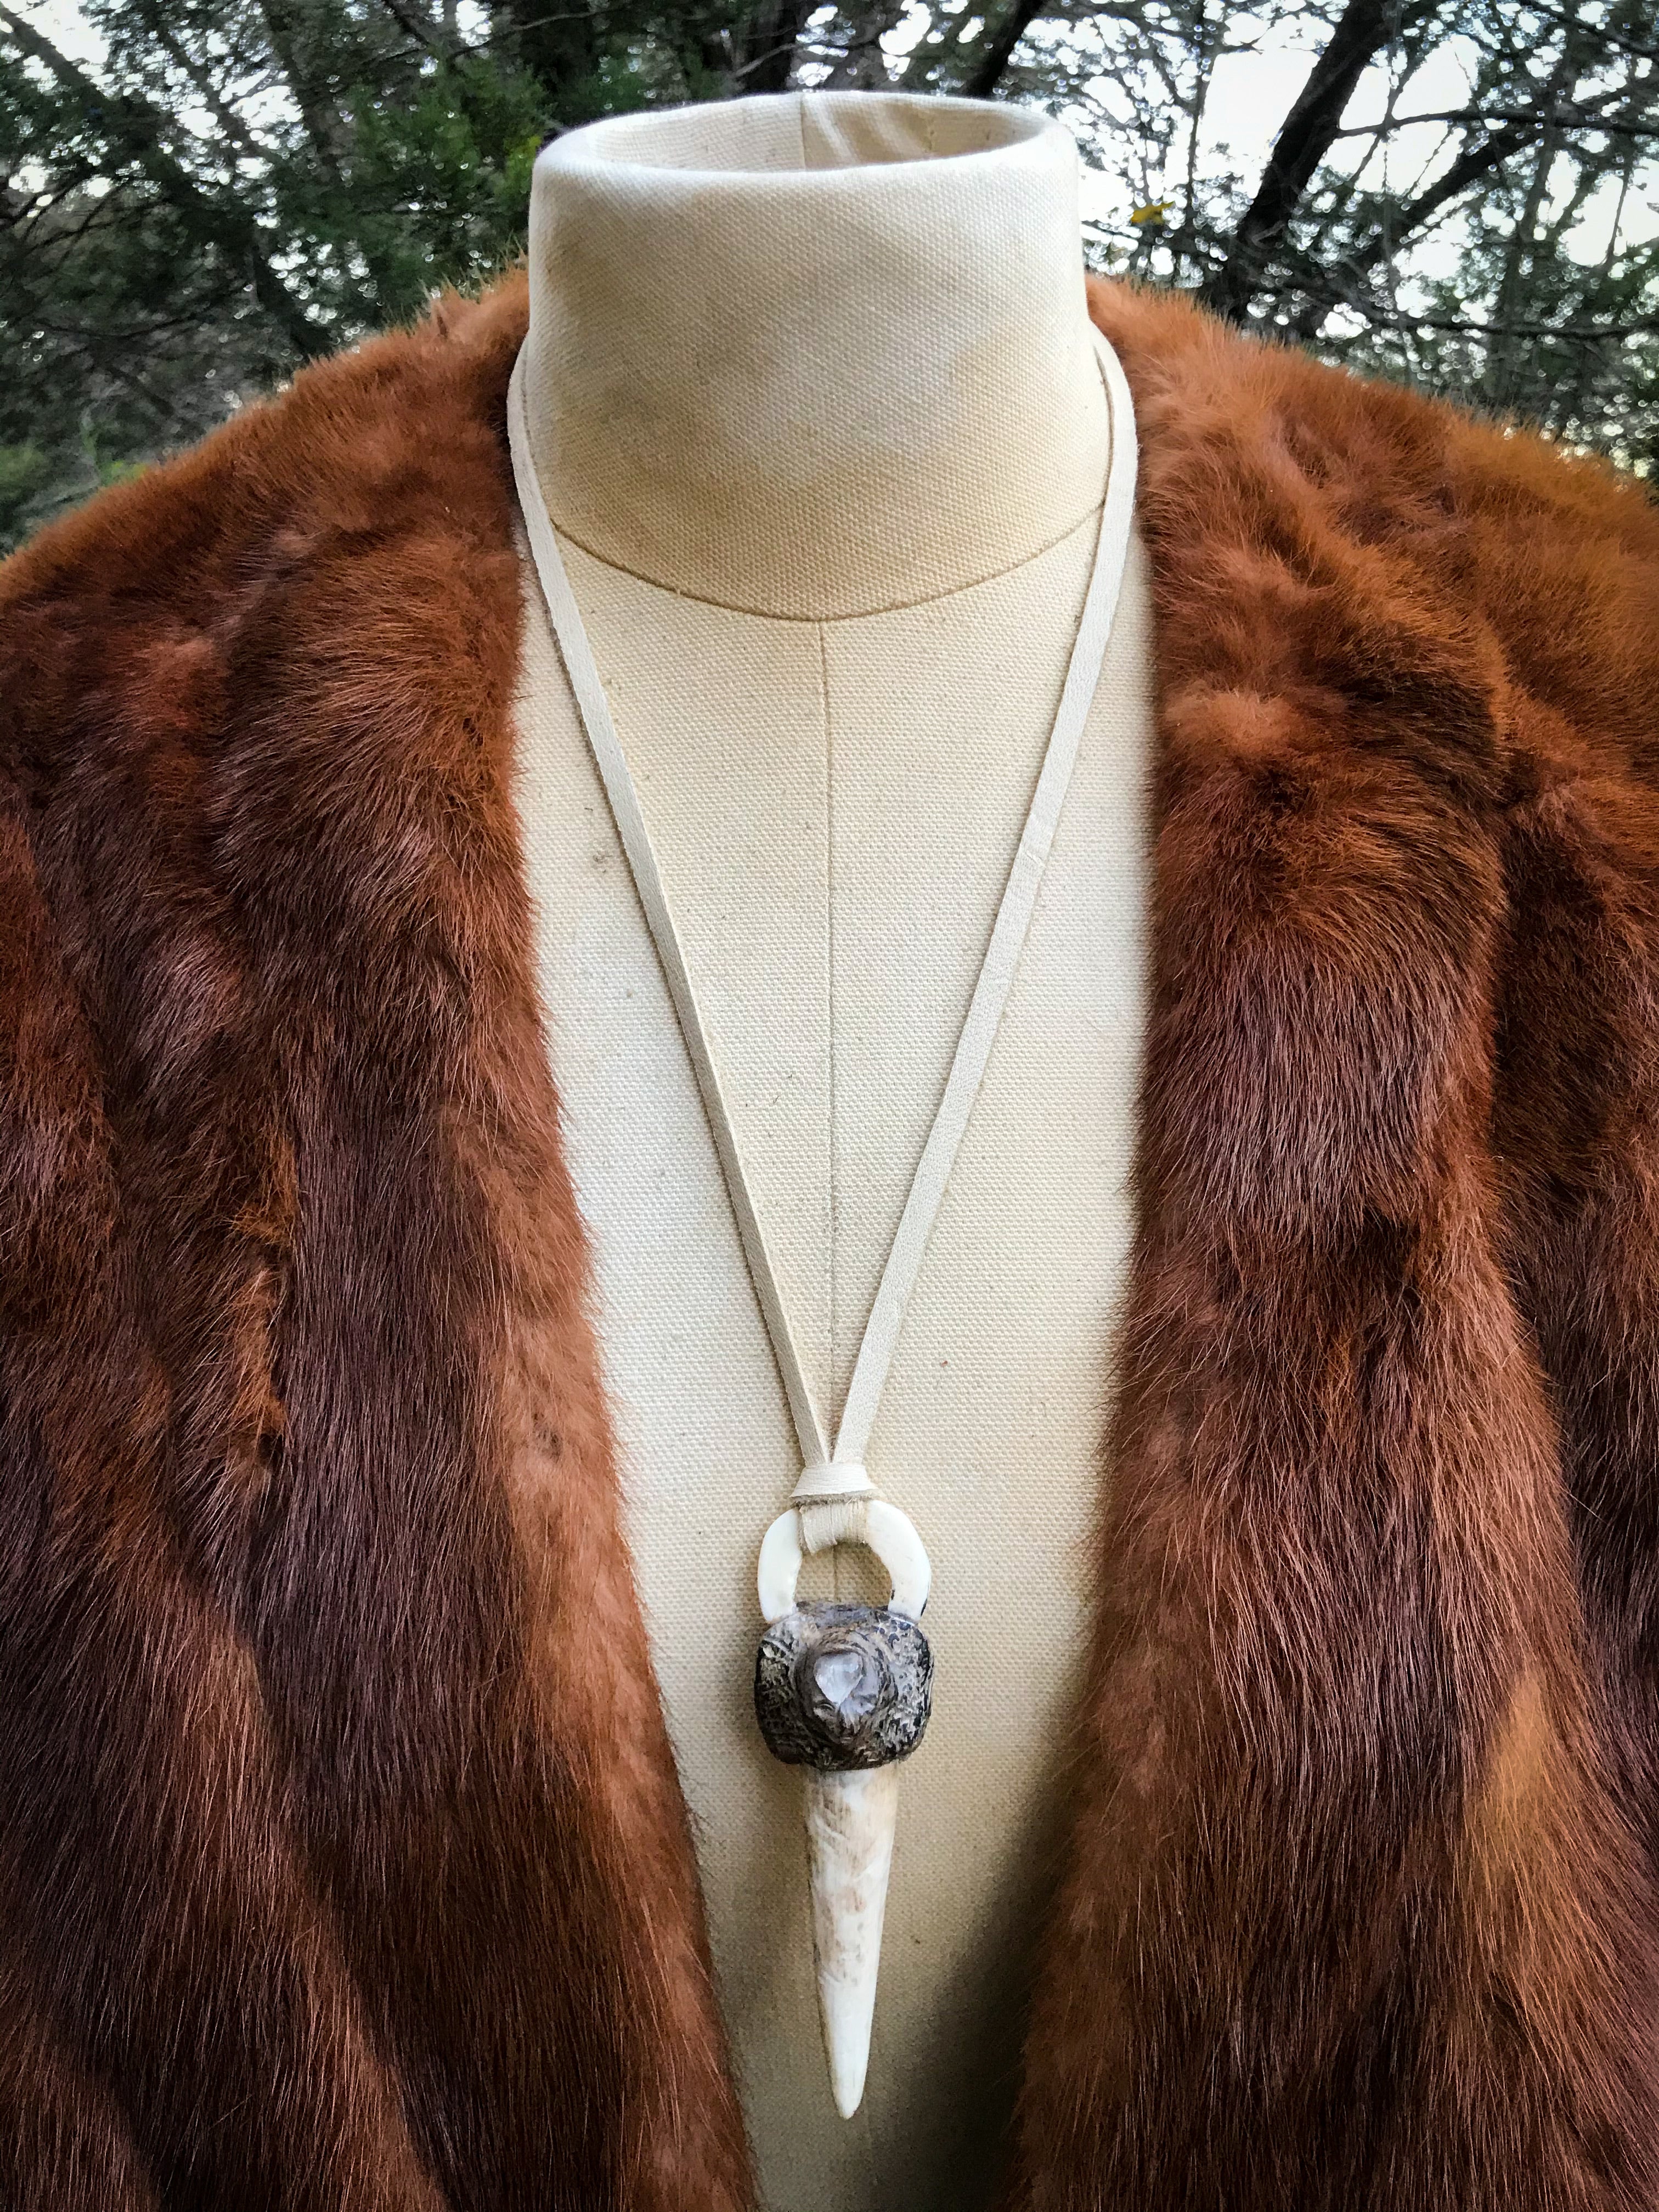 Deer Woman Necklace for Reconnecting to Your Wild Self